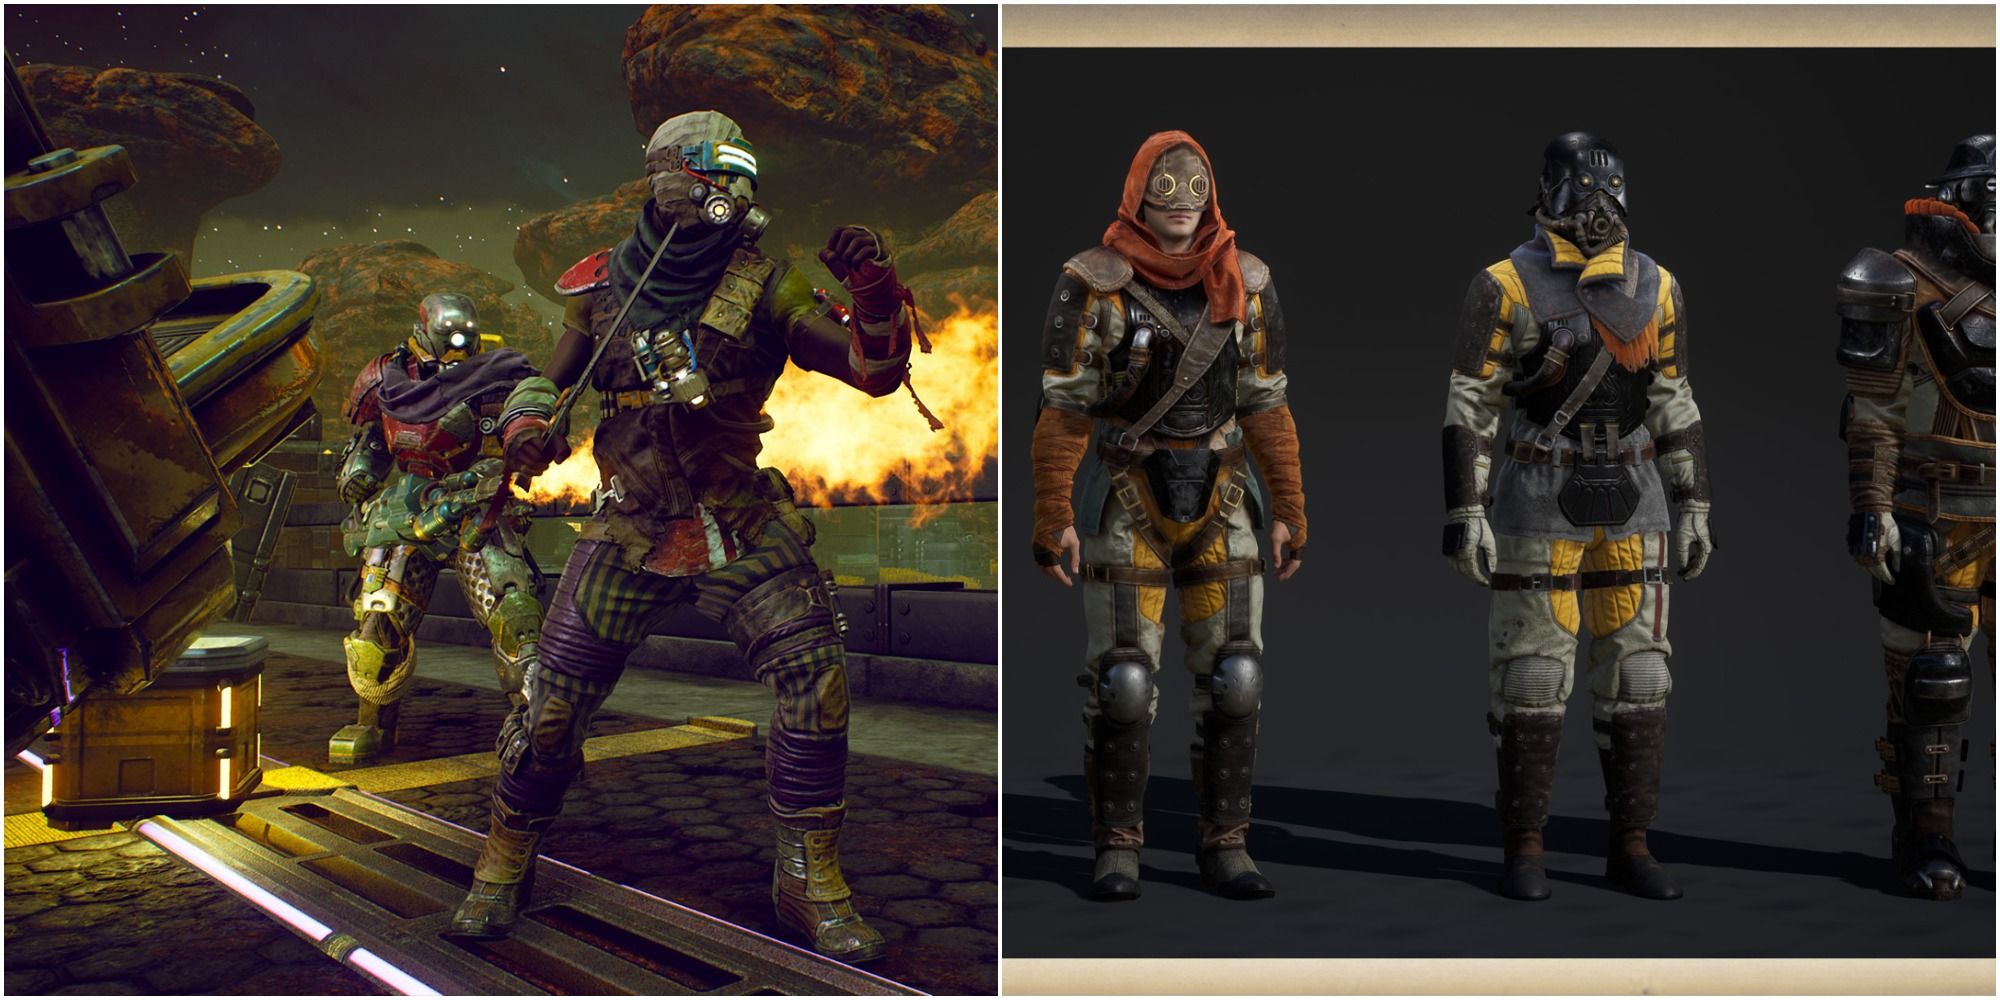 Do armor mods change appearance? : r/outerworlds